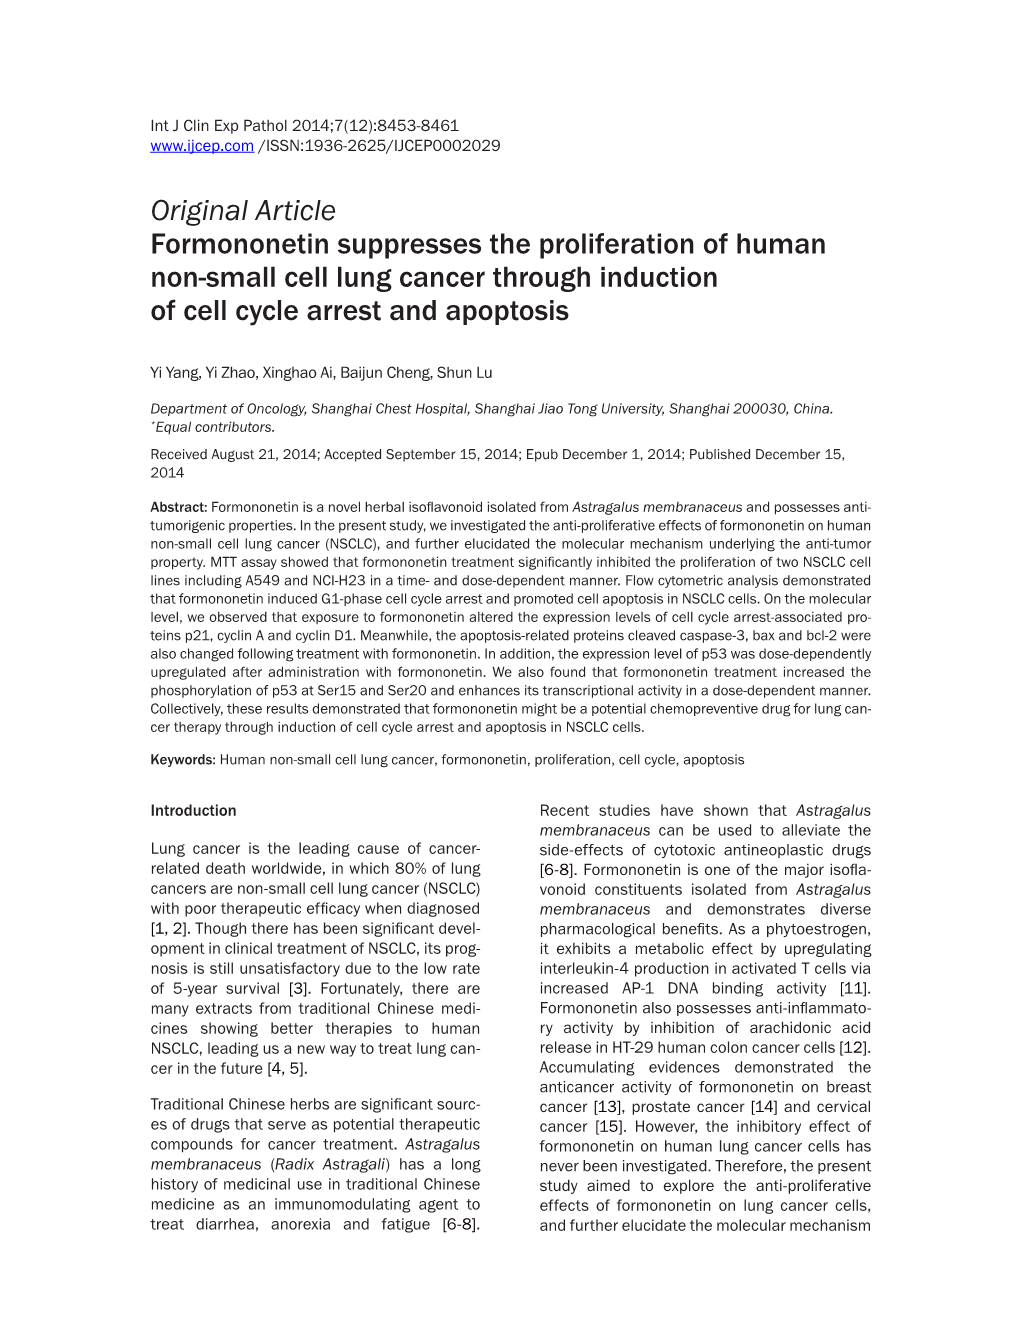 Original Article Formononetin Suppresses the Proliferation of Human Non-Small Cell Lung Cancer Through Induction of Cell Cycle Arrest and Apoptosis